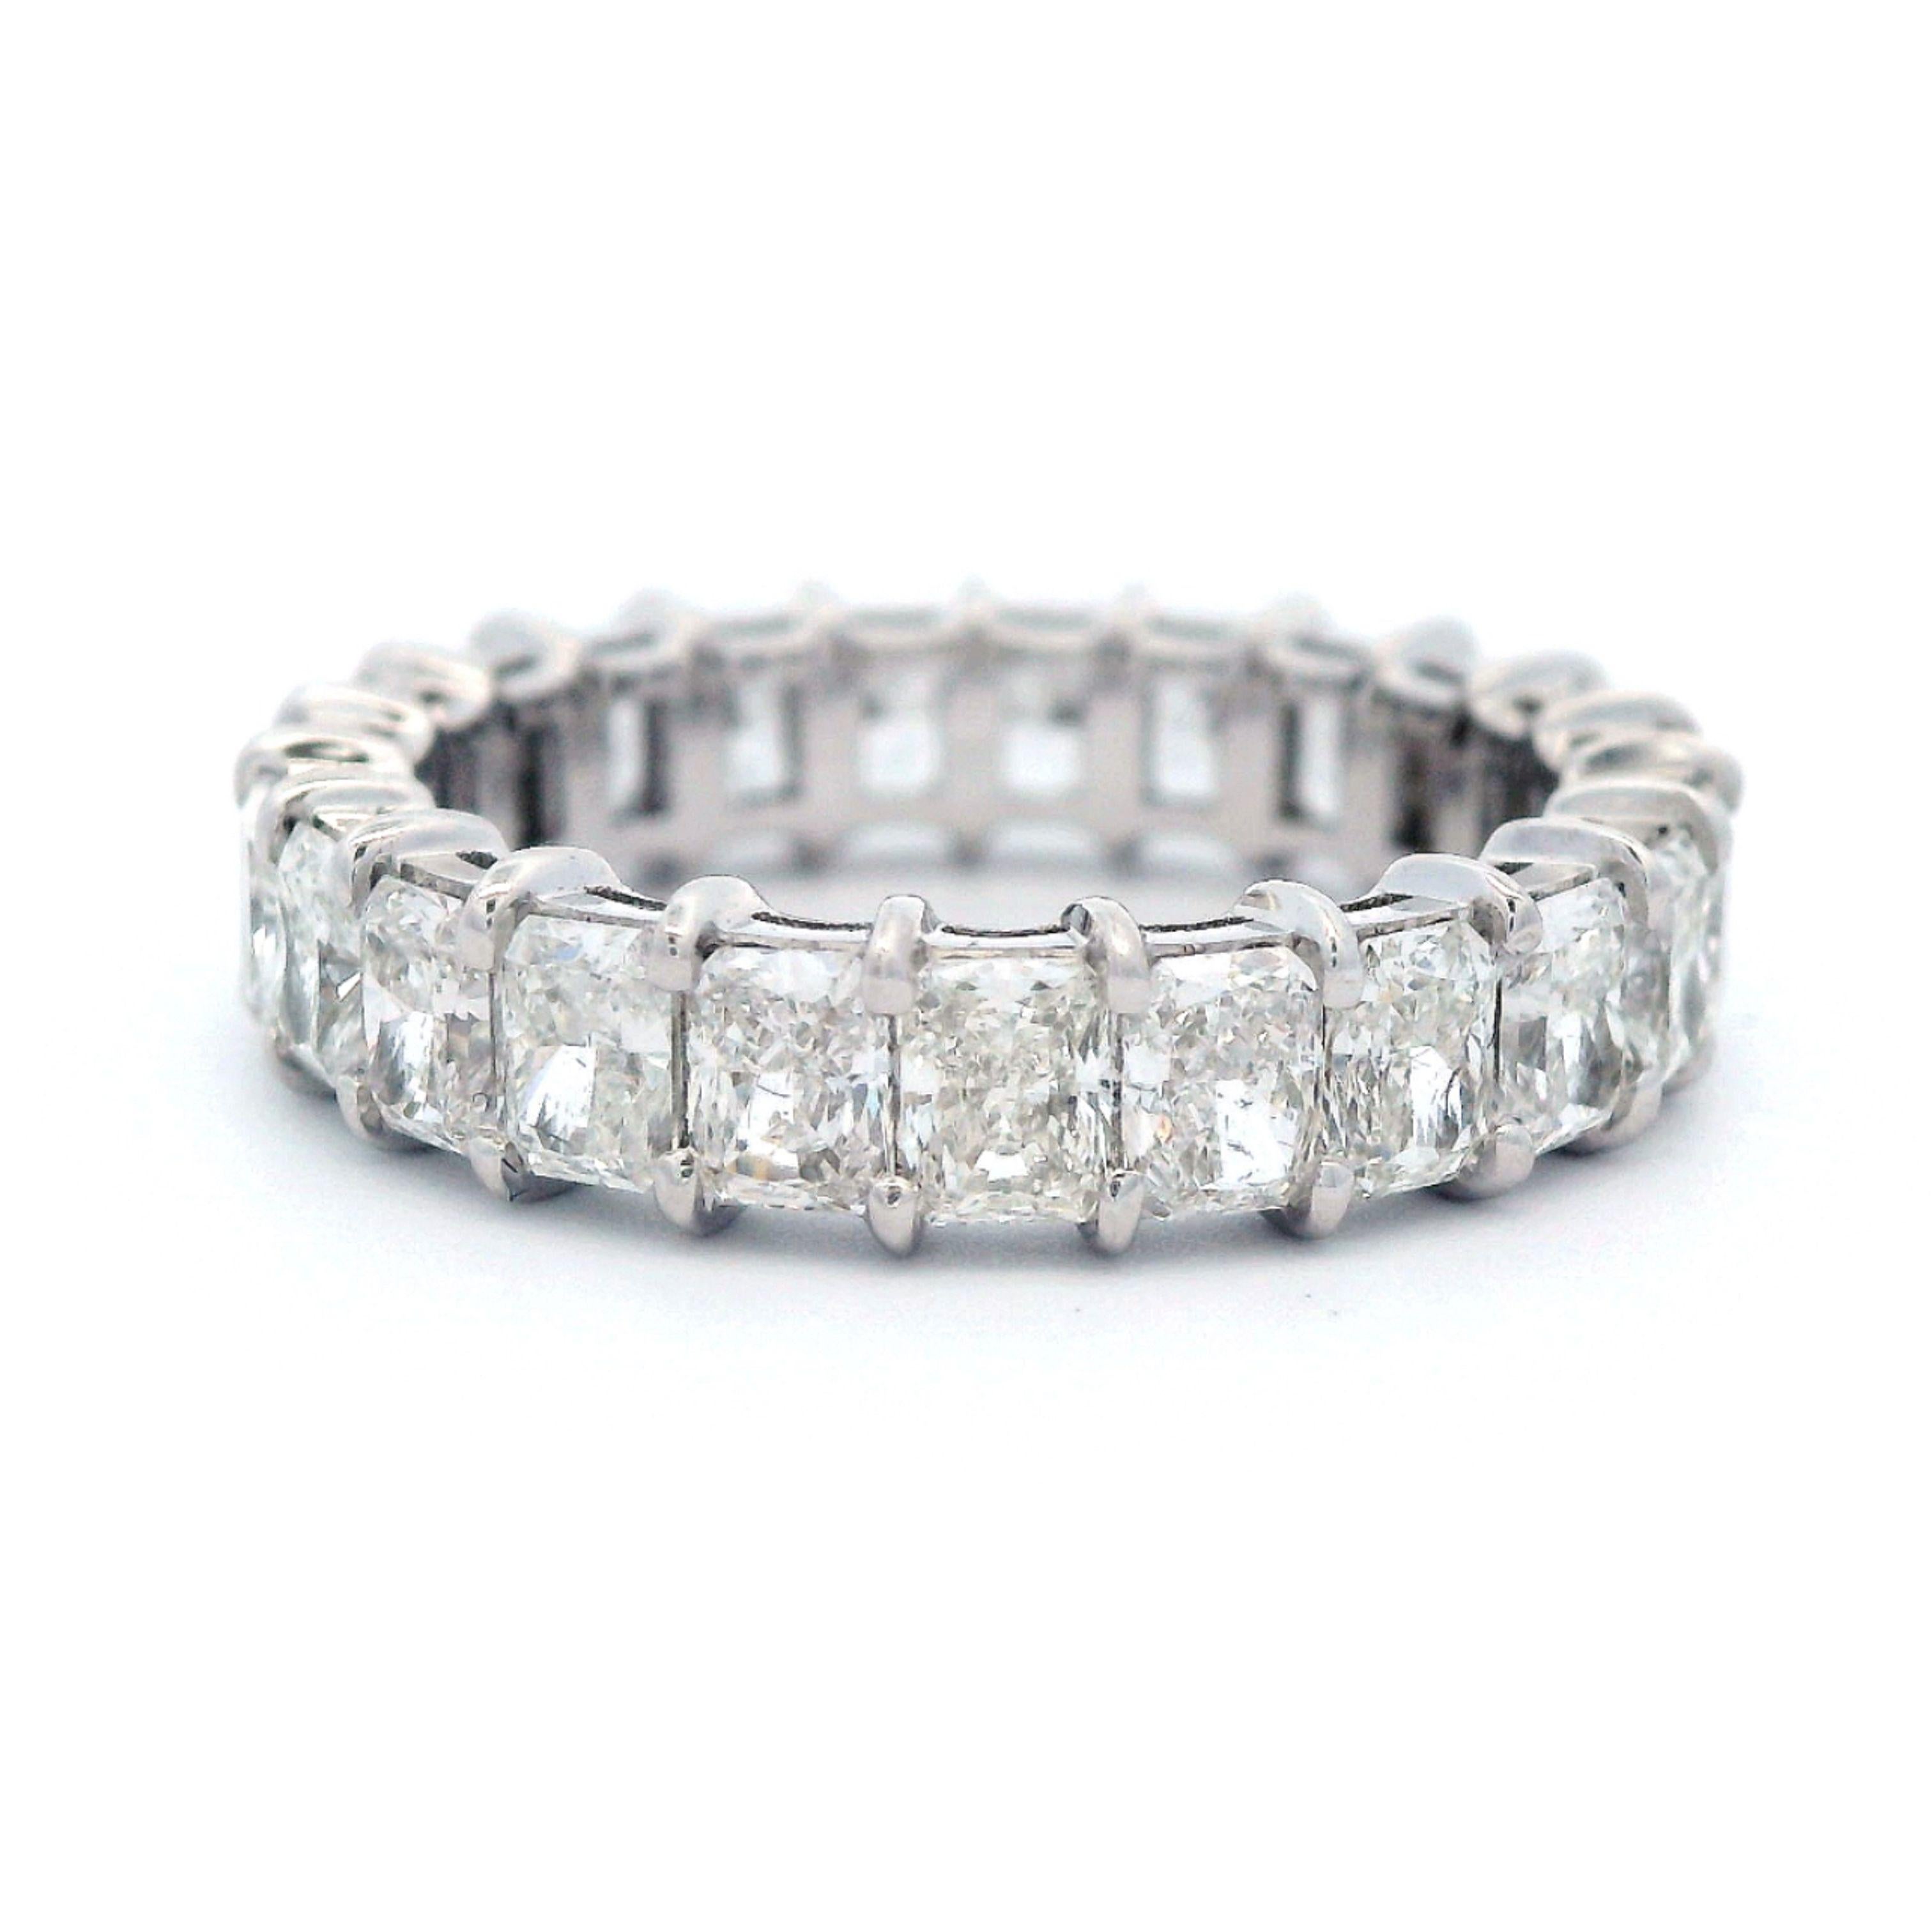 Stunning radiant cut diamond eternity band, by Alexander Beverly Hills.
23 radiant cut diamonds, 3.44 carats total. Approximately F/G color and VS clarity. Set in 18k white gold, 3.22 grams, size 5.5. 
Accommodated with an up-to-date digital